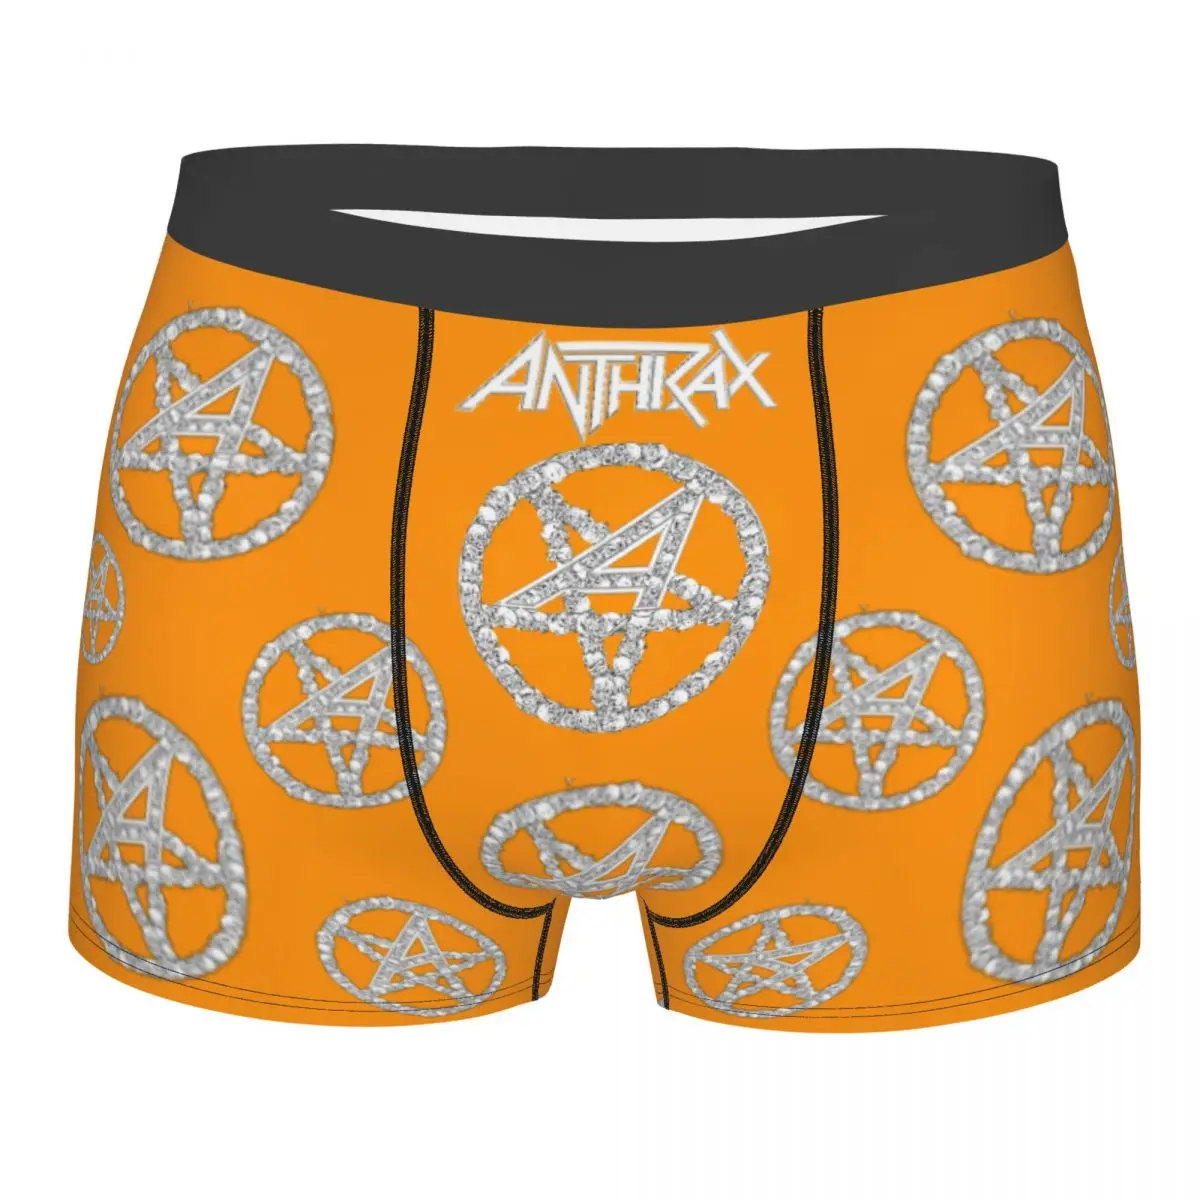 ANTHRAX BAND 1 Man's Printed Boxer Briefs Underwear ANTHRAX Highly Breathable Top Quality Birthday Gifts anthrax kings among scotland man s printed boxer briefs underwear anthrax highly breathable high quality birthday gifts